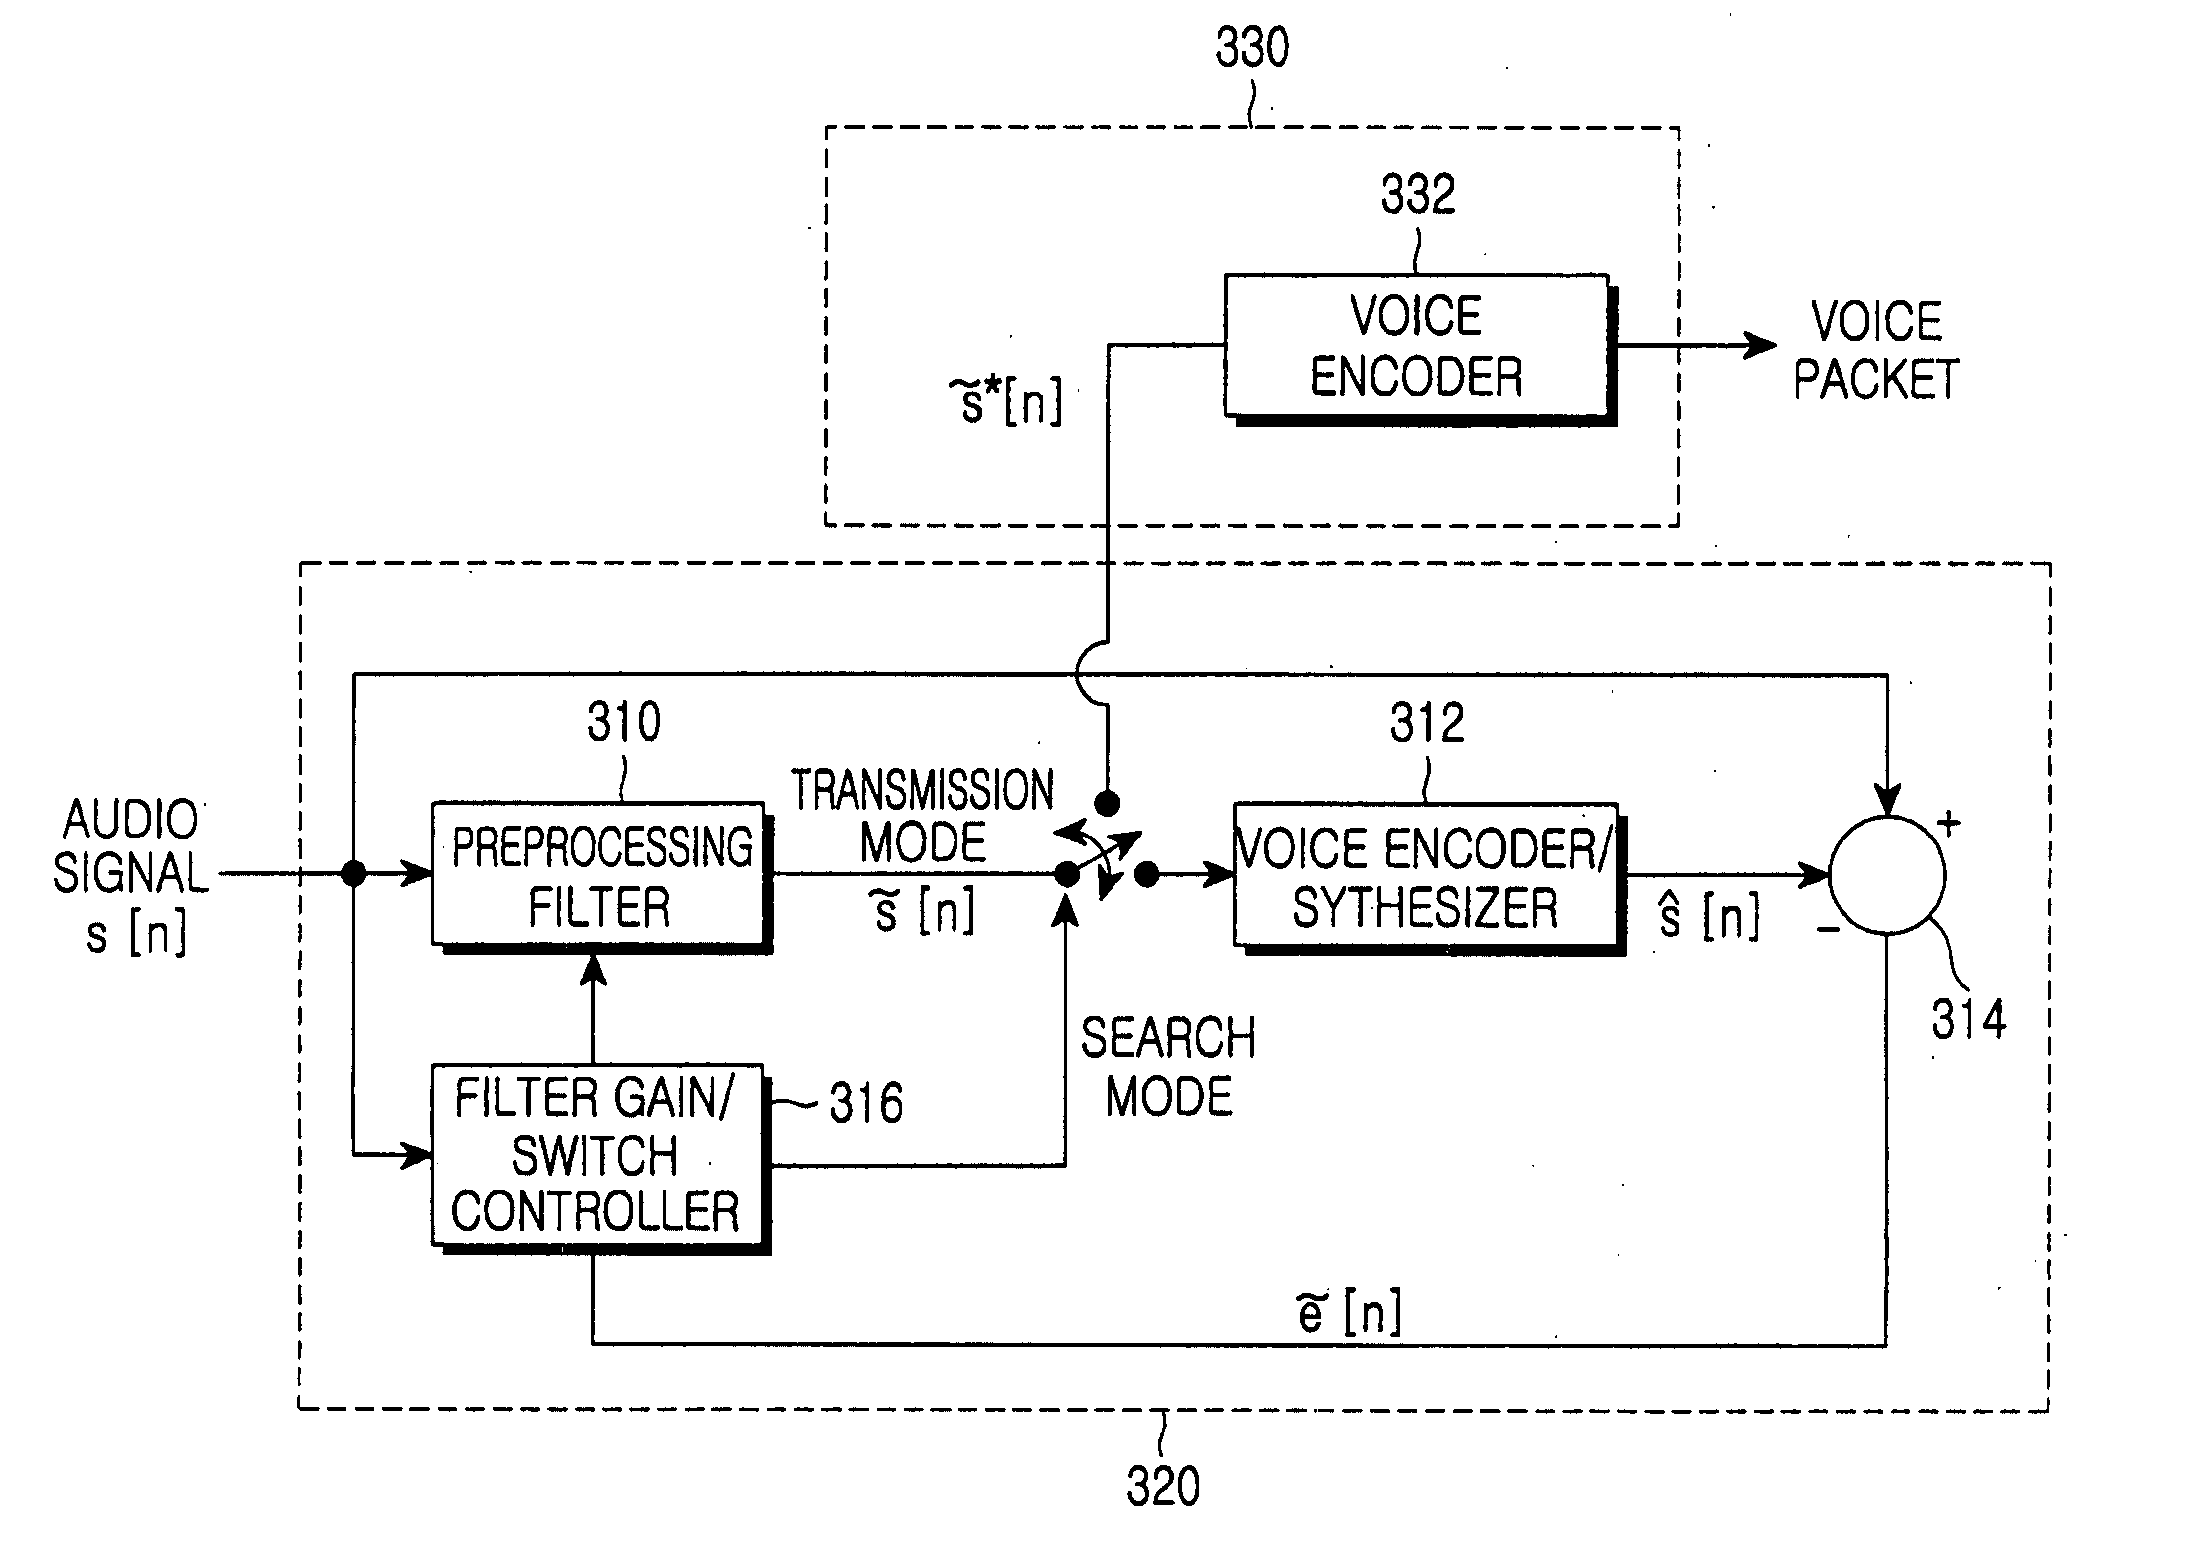 Apparatus and method for transmitting audio signals